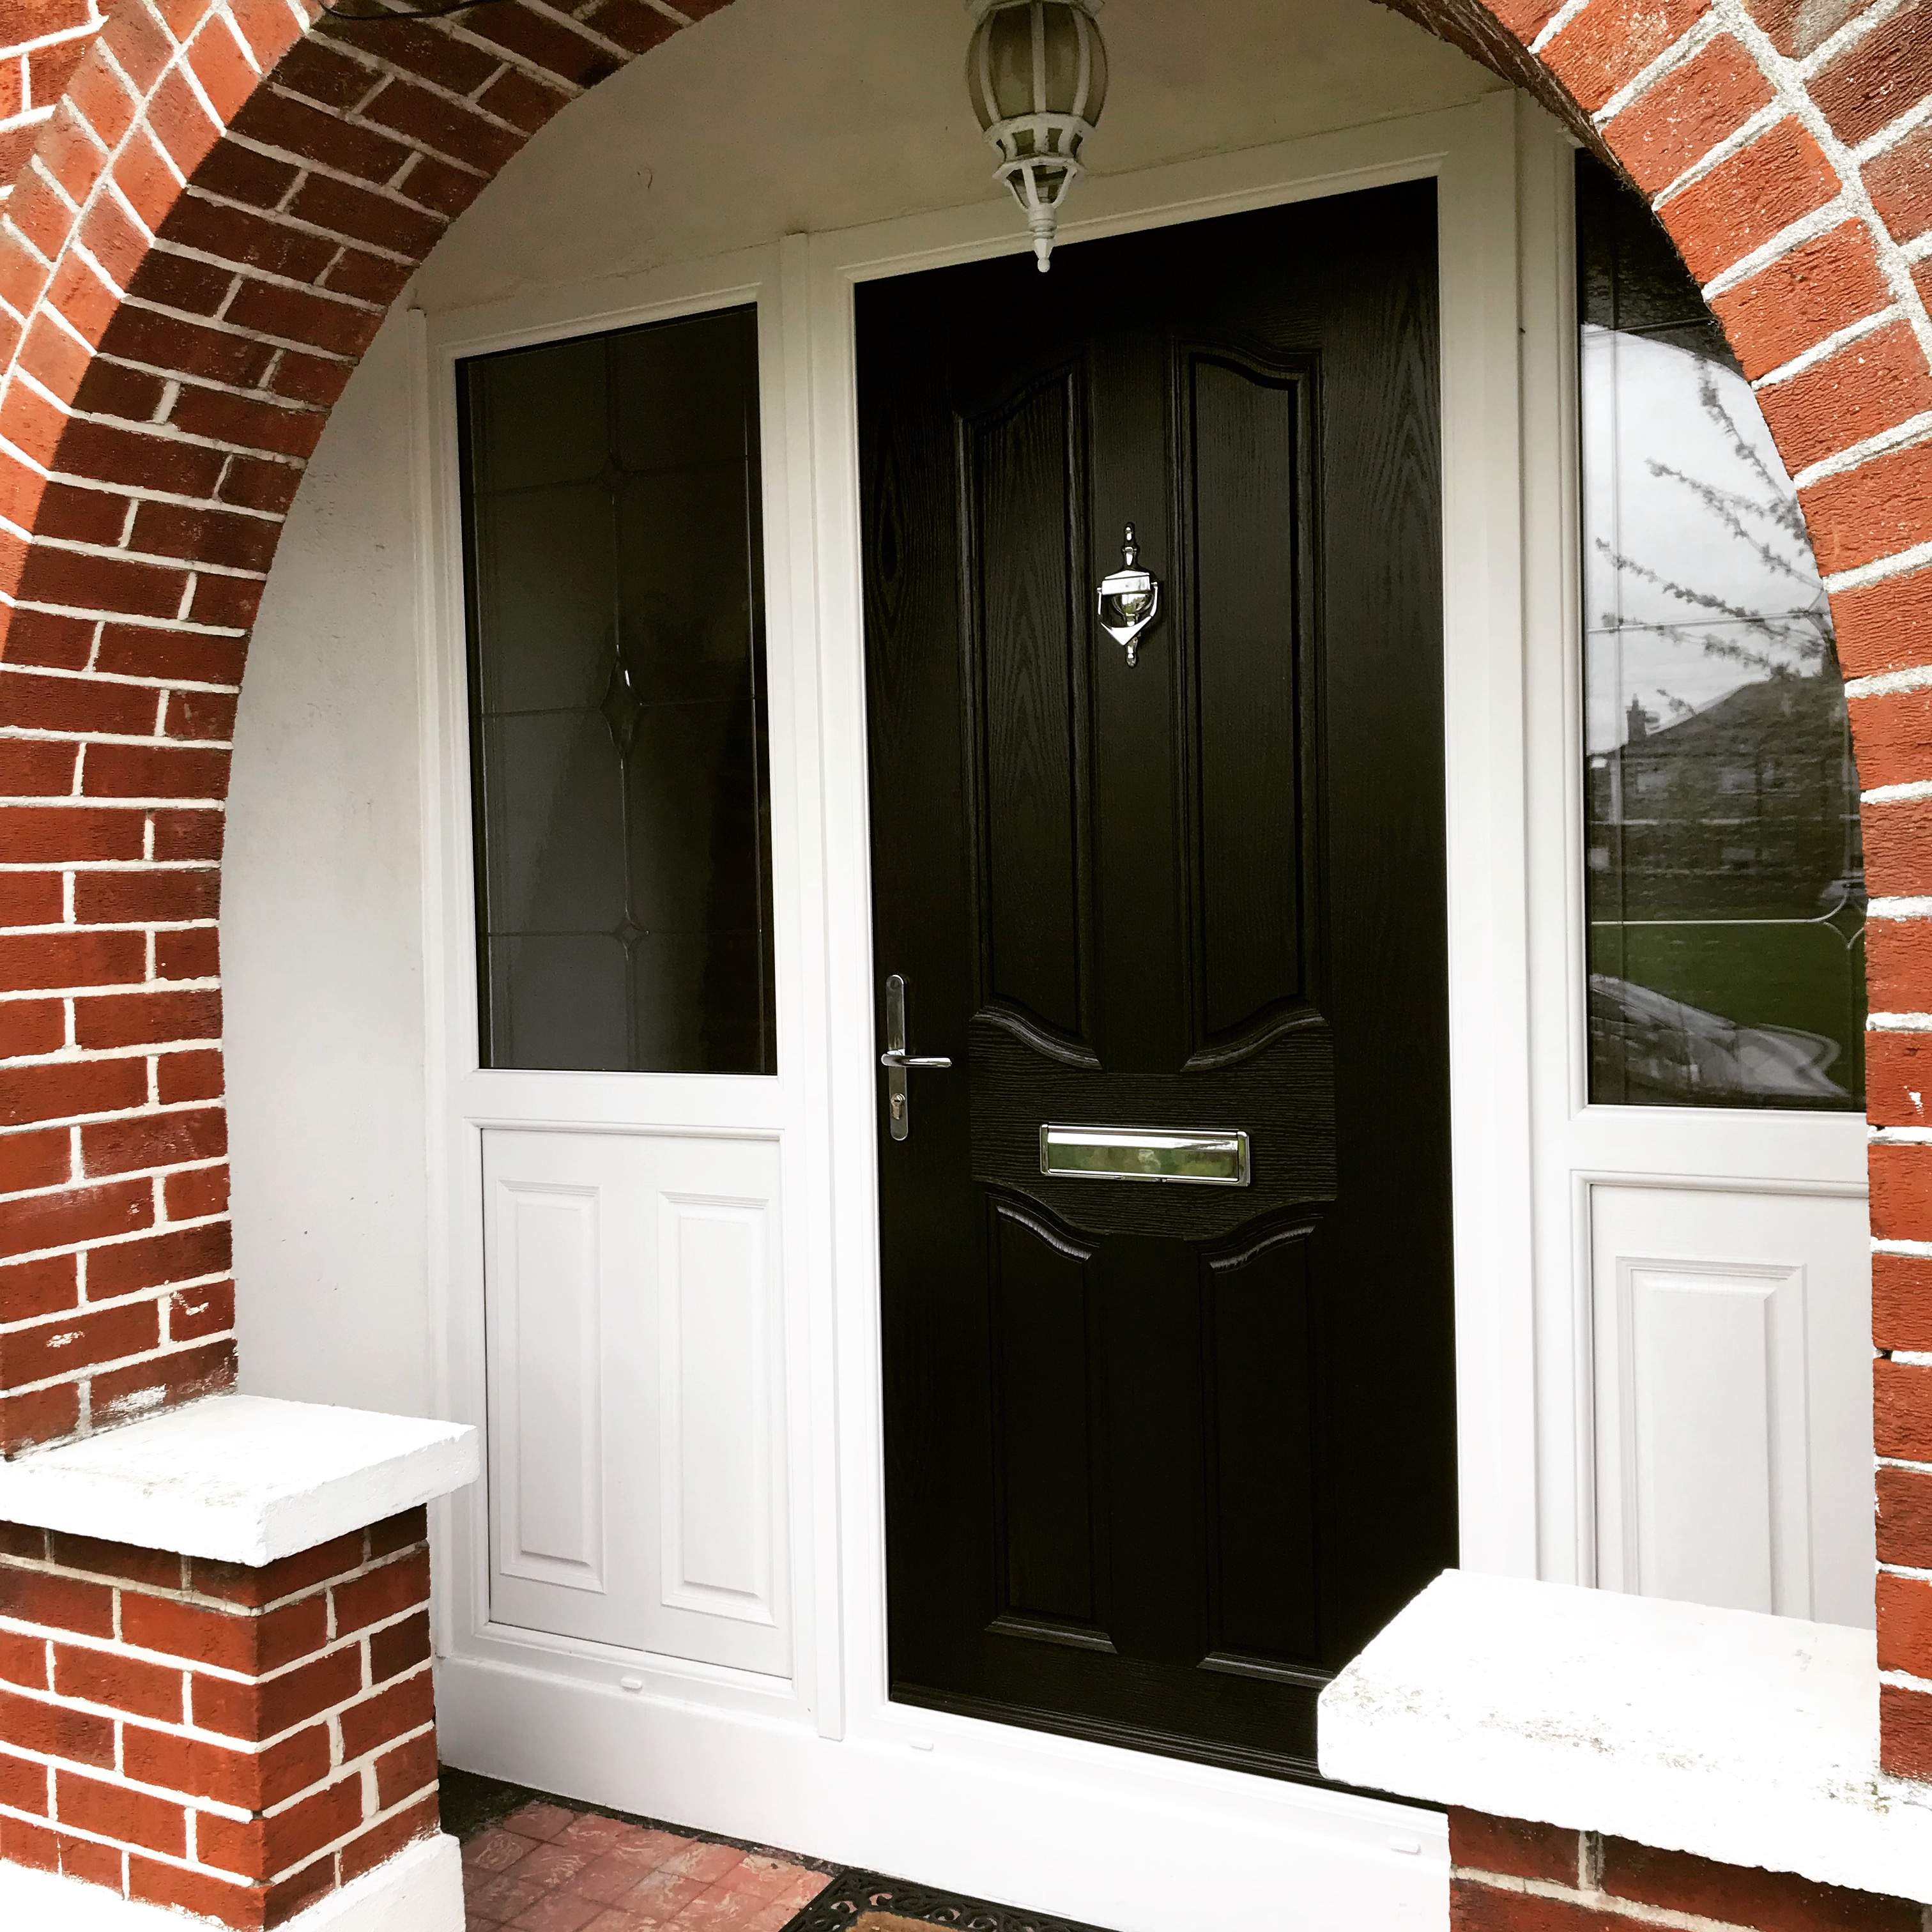 APEER APL1 COMPOSITE FRONT DOOR FITTED BY ASGARD WINDOWS IN GLASNEVIN